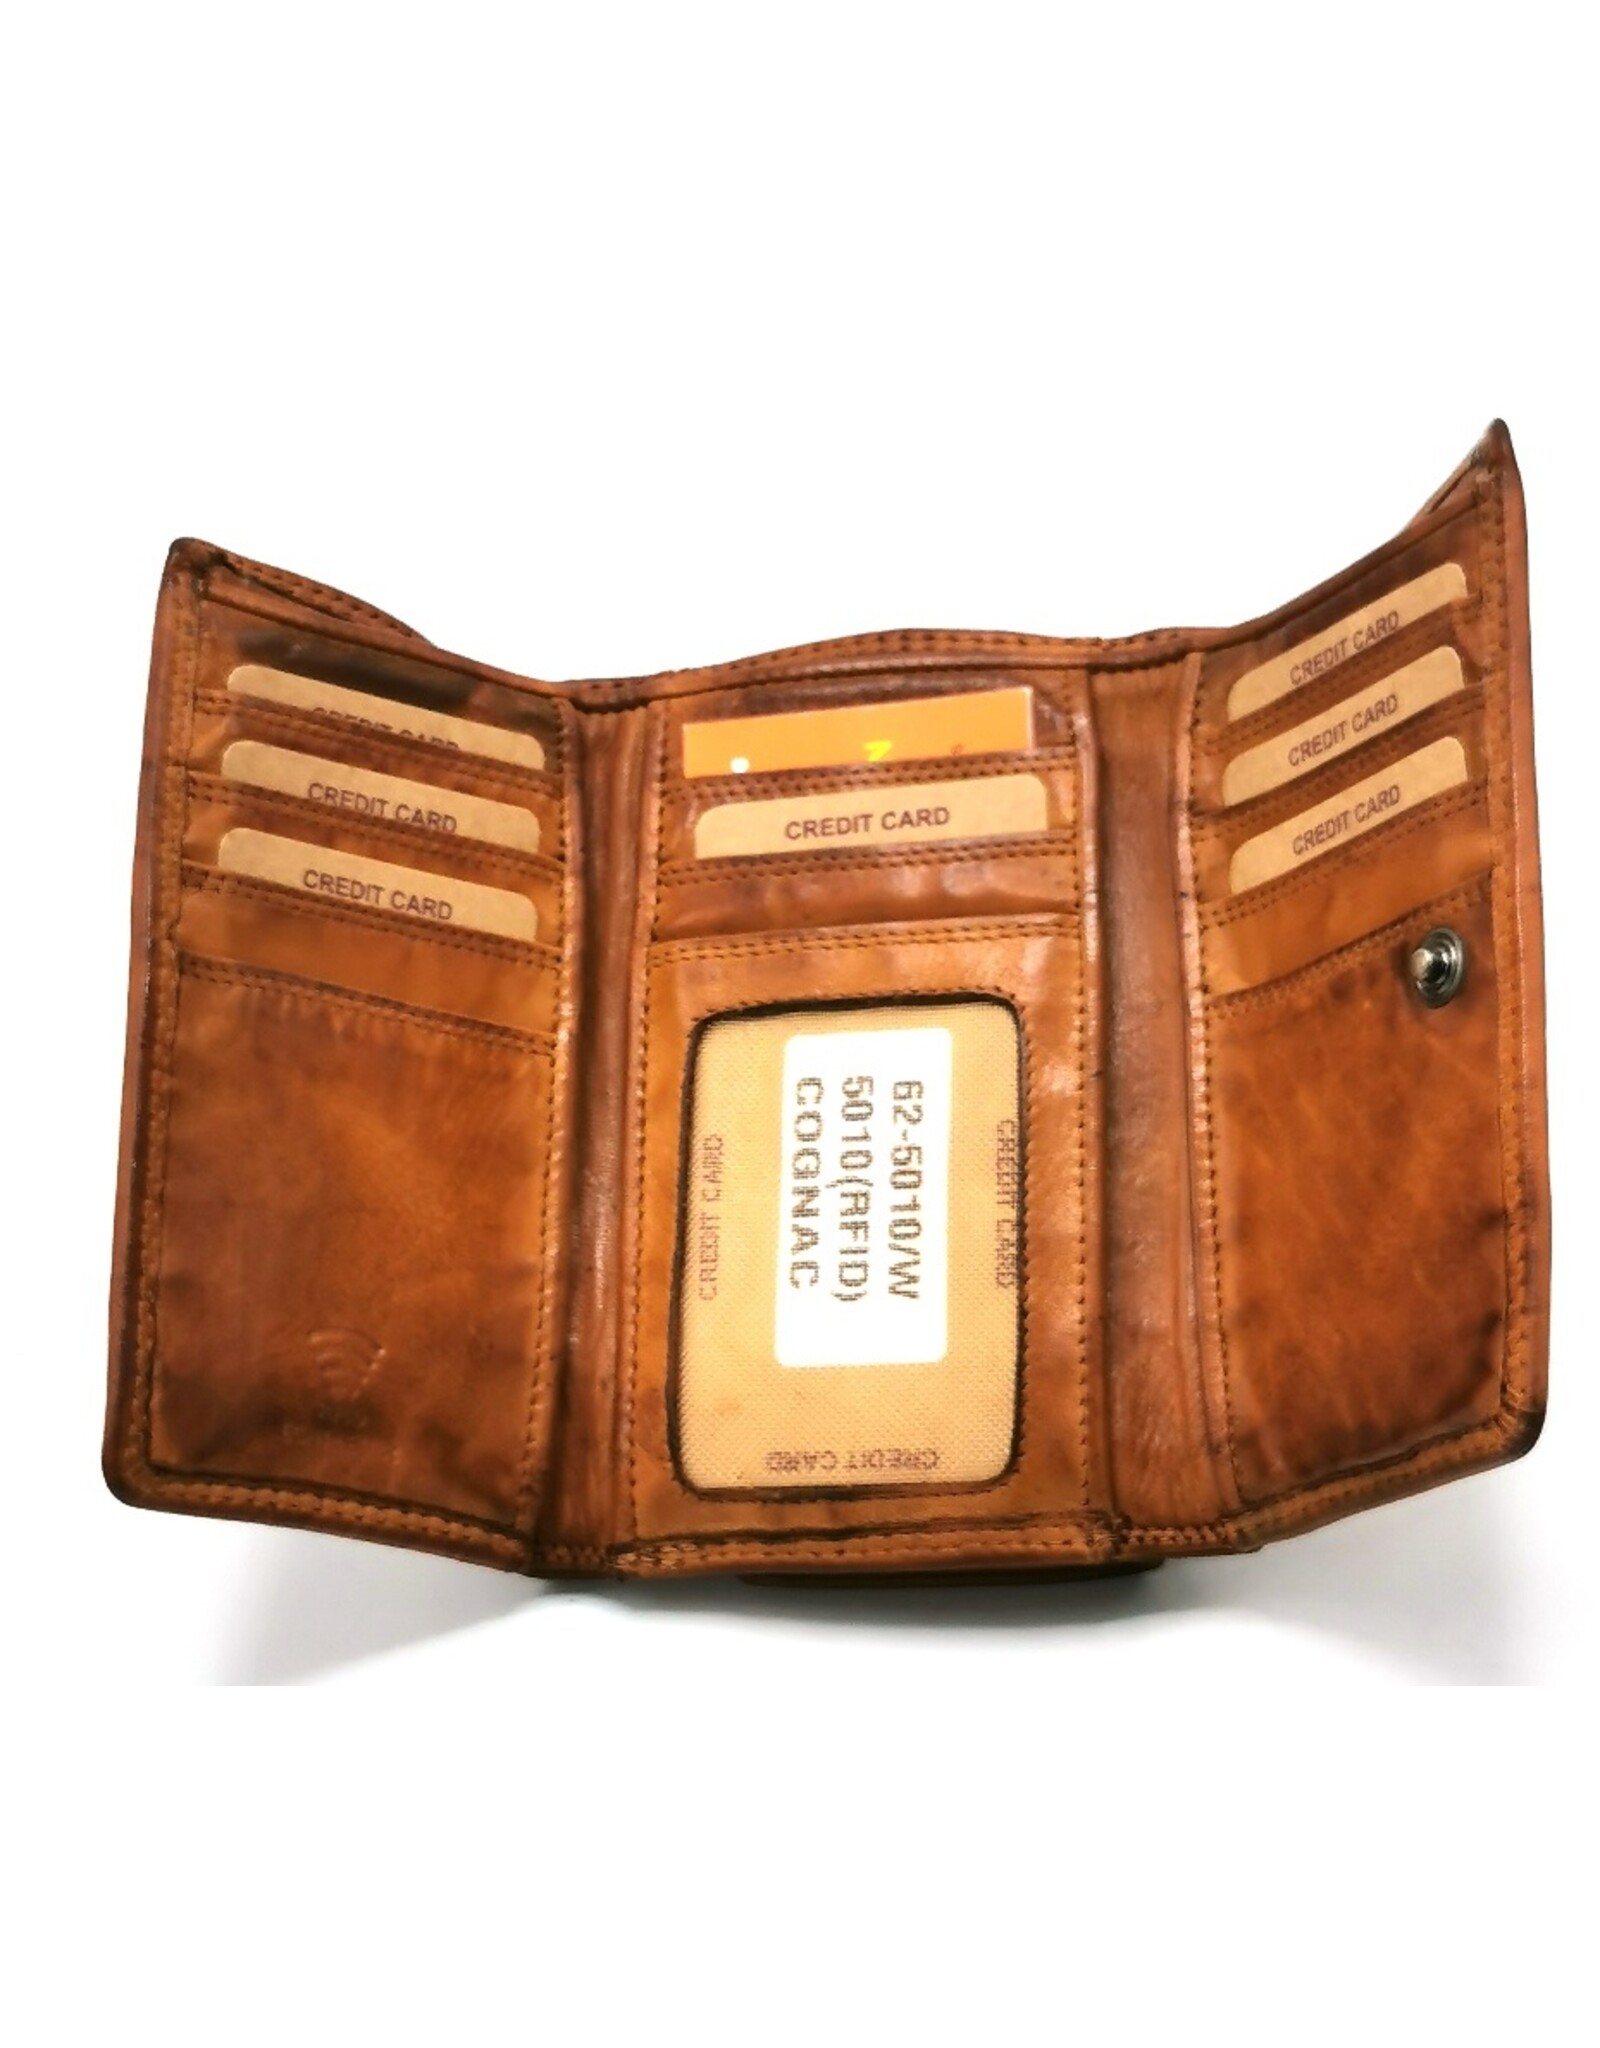 HillBurry Leather wallets - Hillburry Wallet Vintage Washed Leather cognac